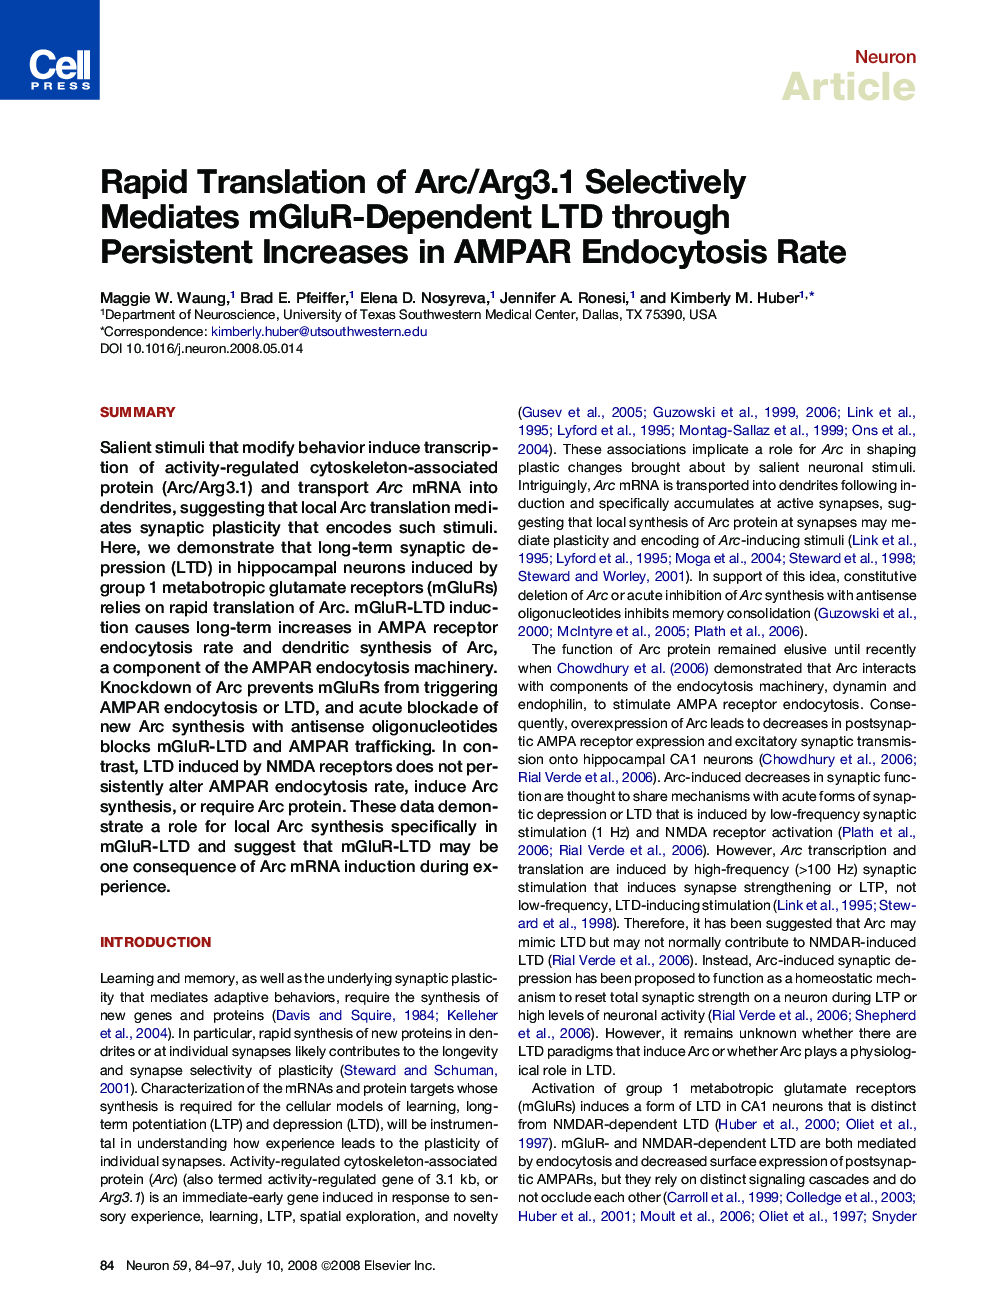 Rapid Translation of Arc/Arg3.1 Selectively Mediates mGluR-Dependent LTD through Persistent Increases in AMPAR Endocytosis Rate